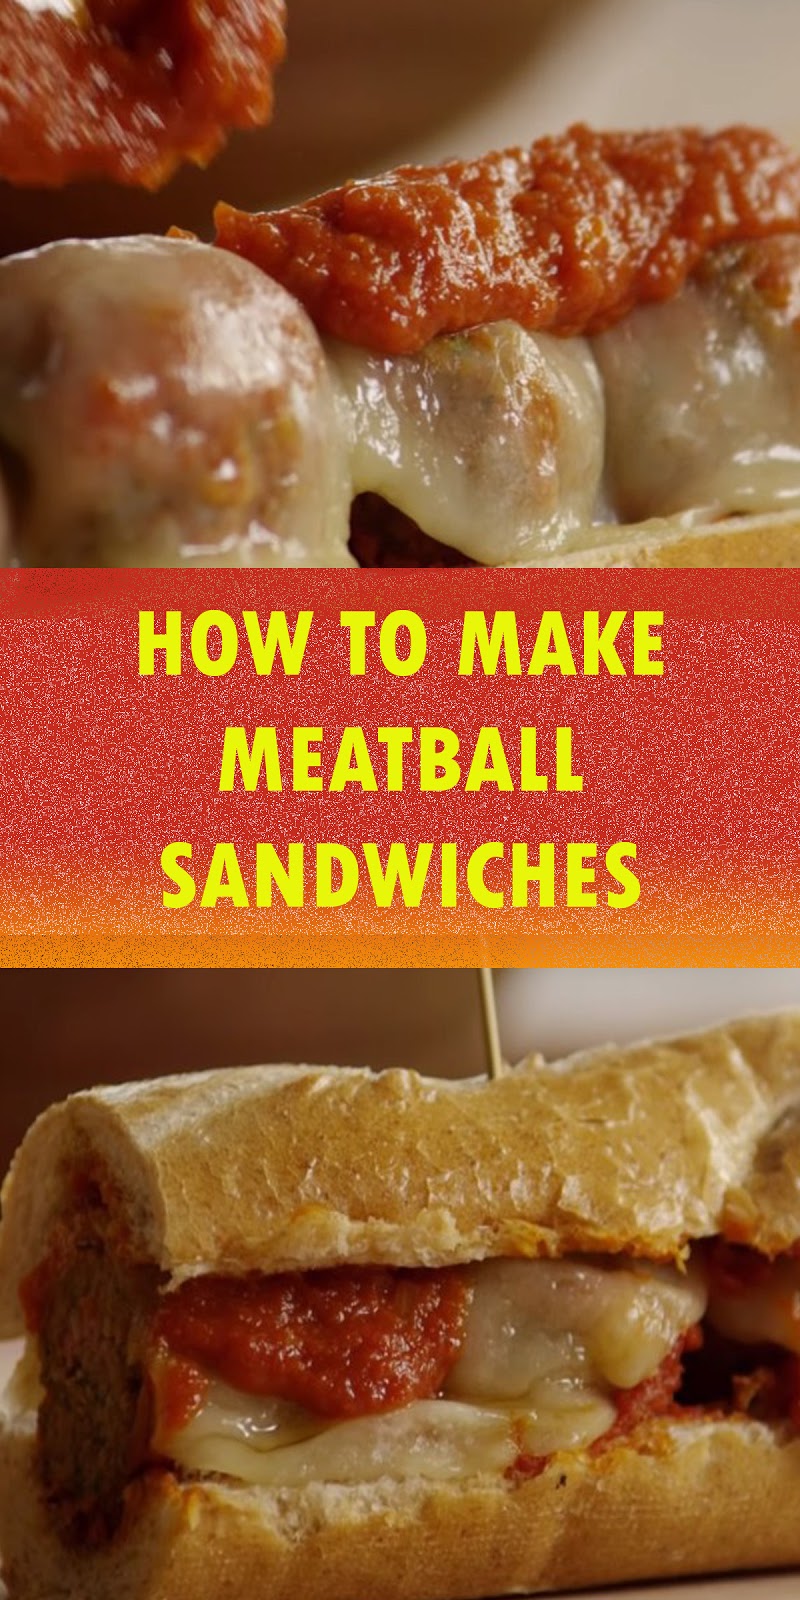 HOW TO MAKE MEATBALL SANDWICHES - THE BEST AND EASY RECIPES